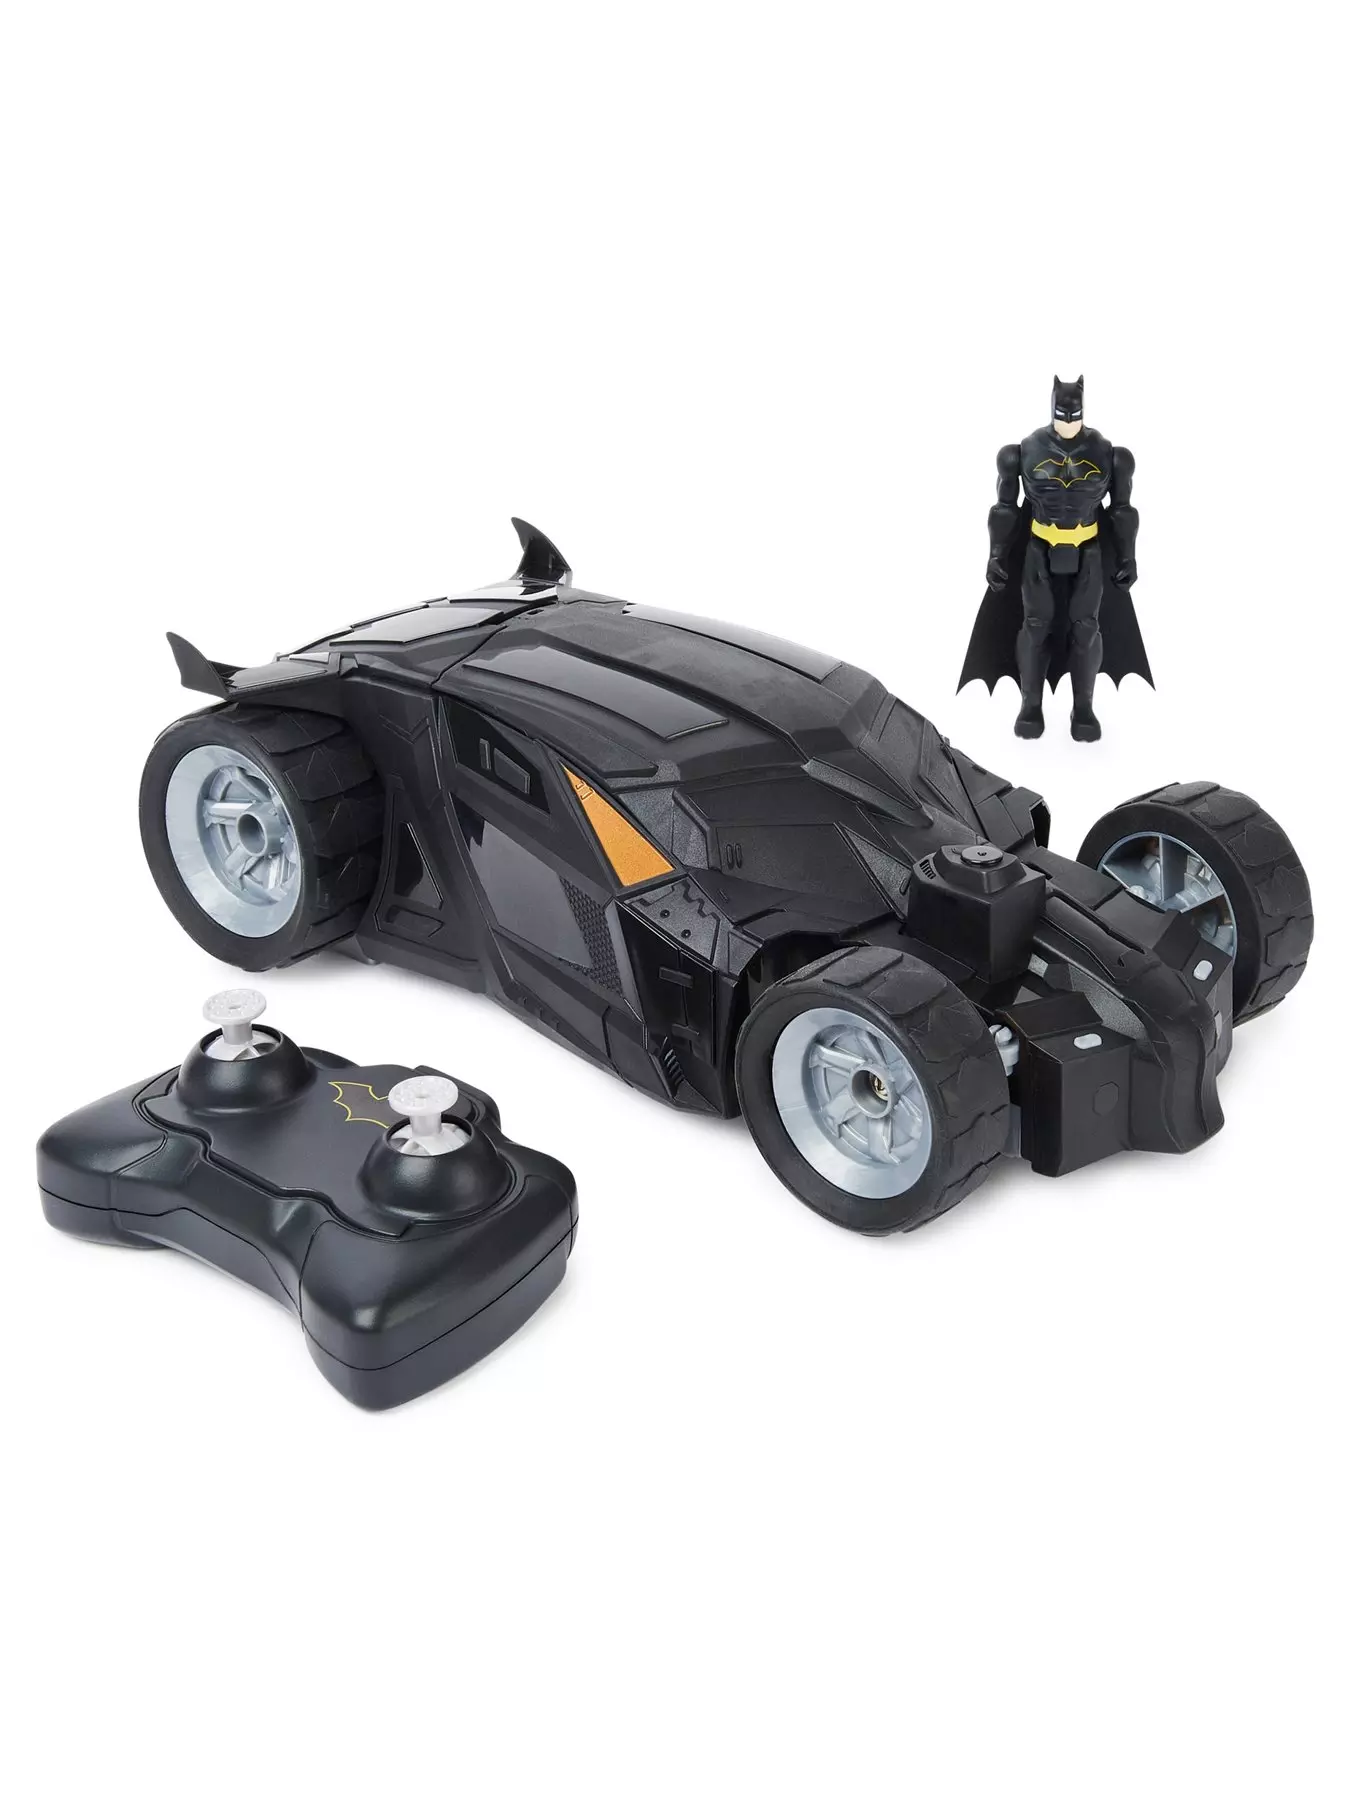 Fisher-Price DC Batwheels BAM The Batmobile with Utility Belt 1:55 Scale Vehicle